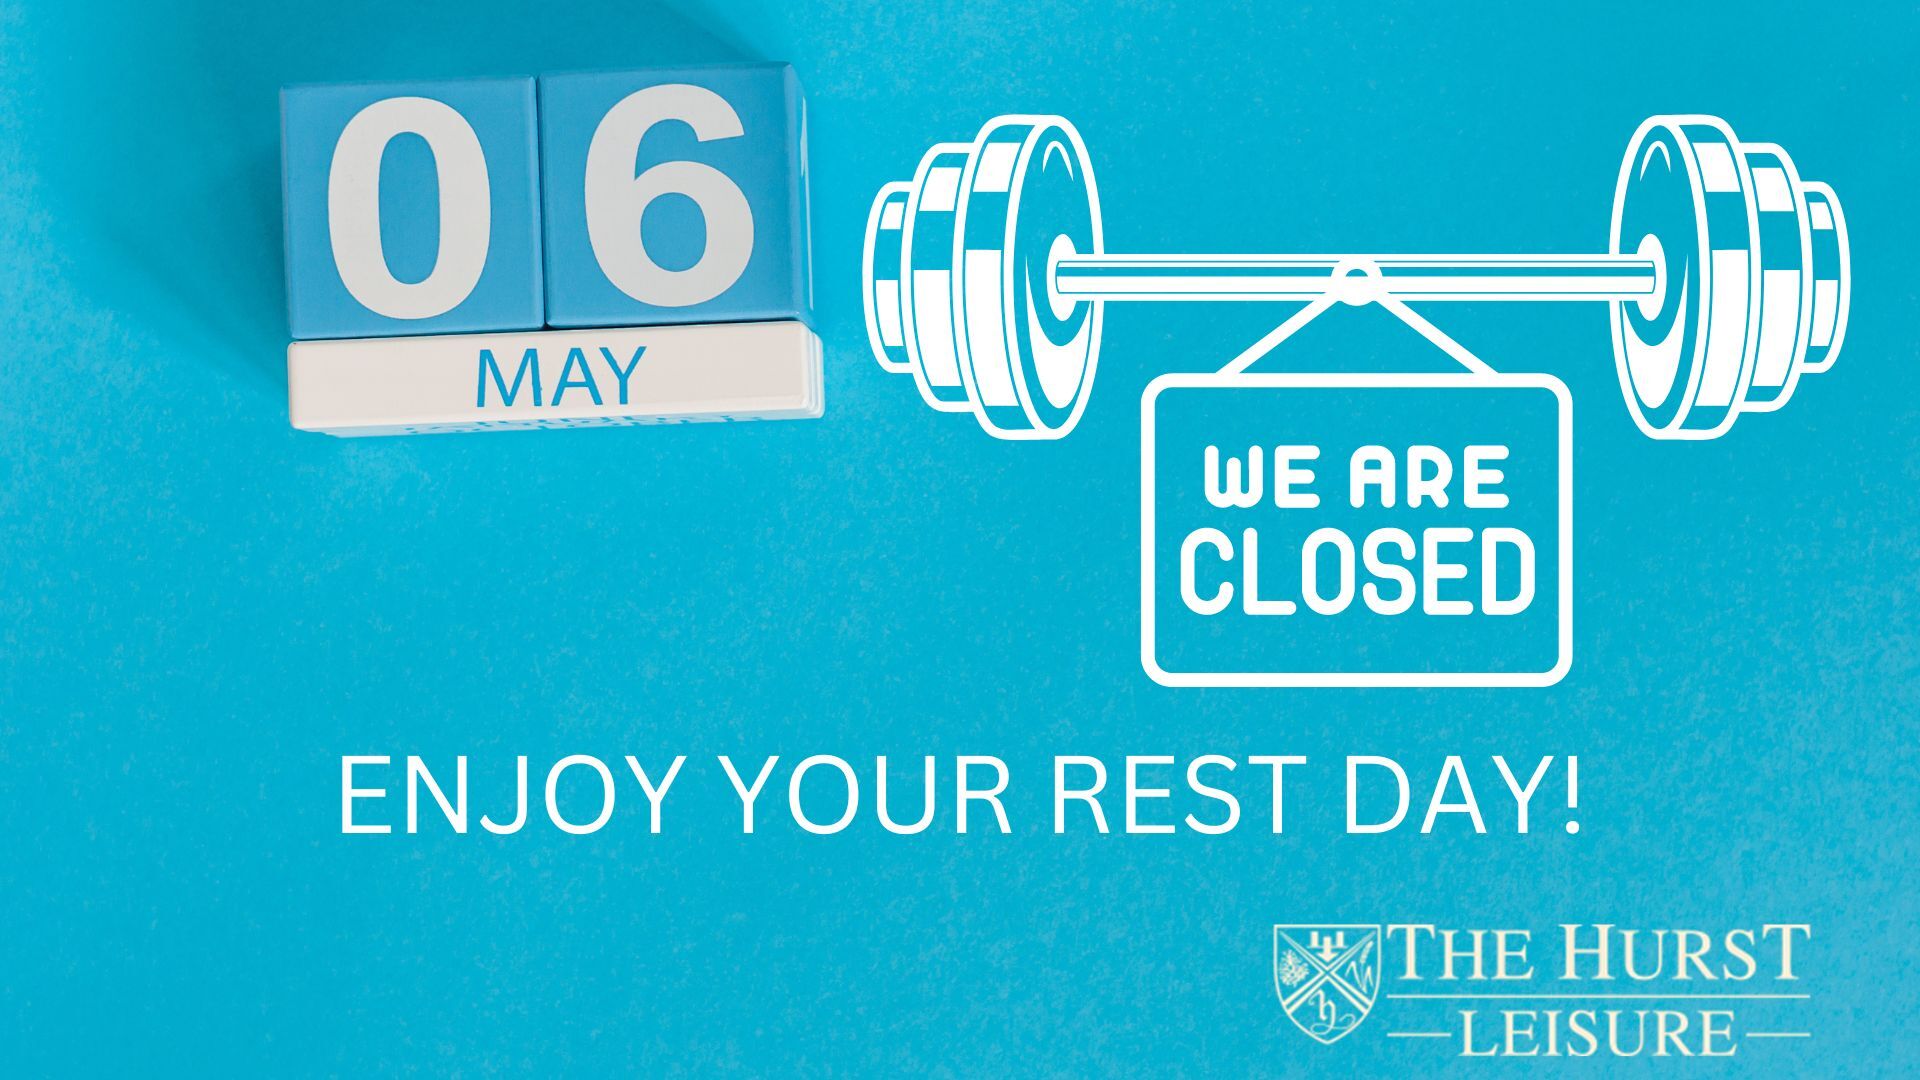 We are closed, enjoy your rest day